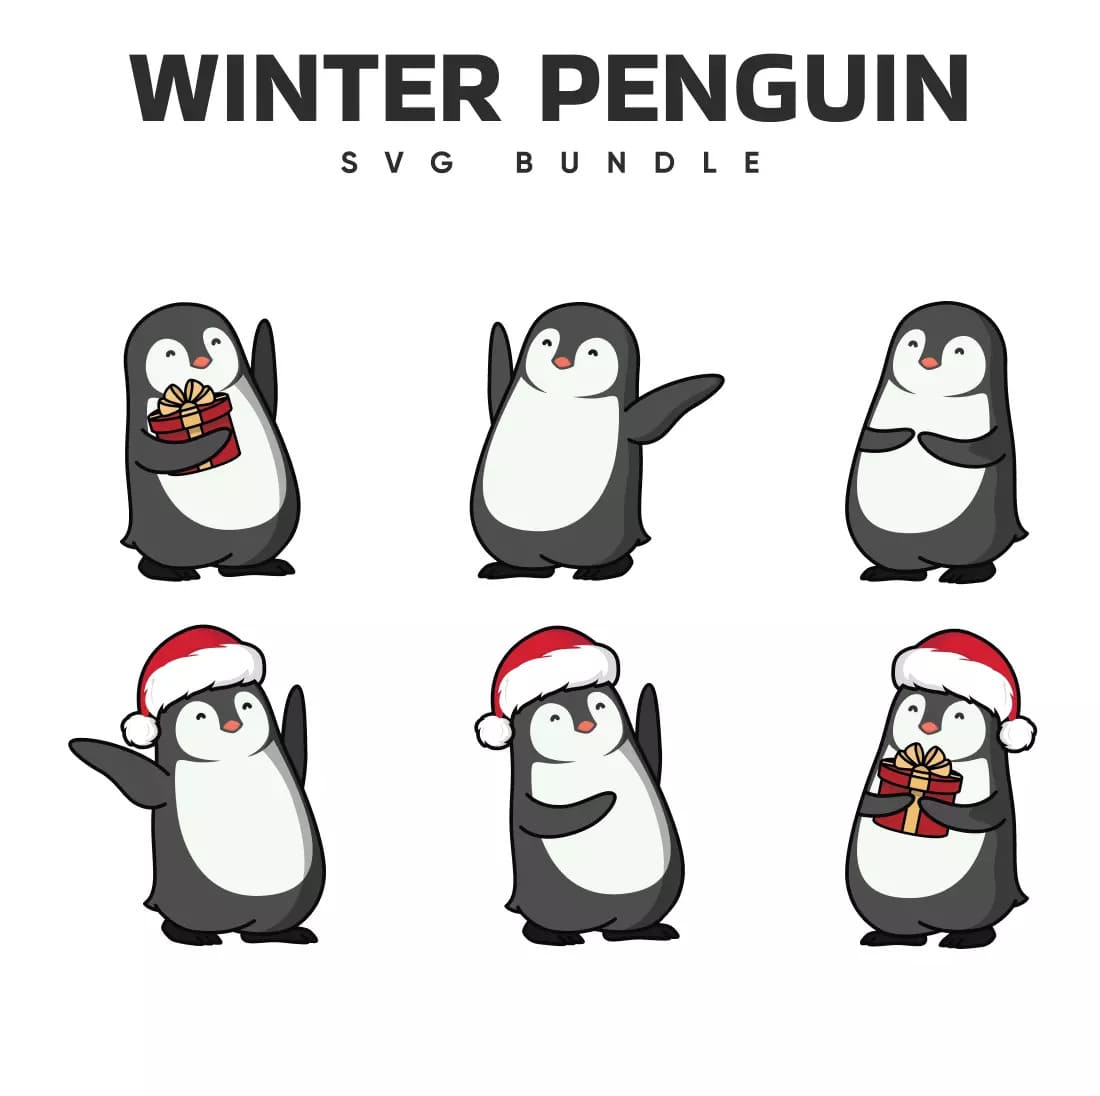 Bunch of penguins with christmas hats on.